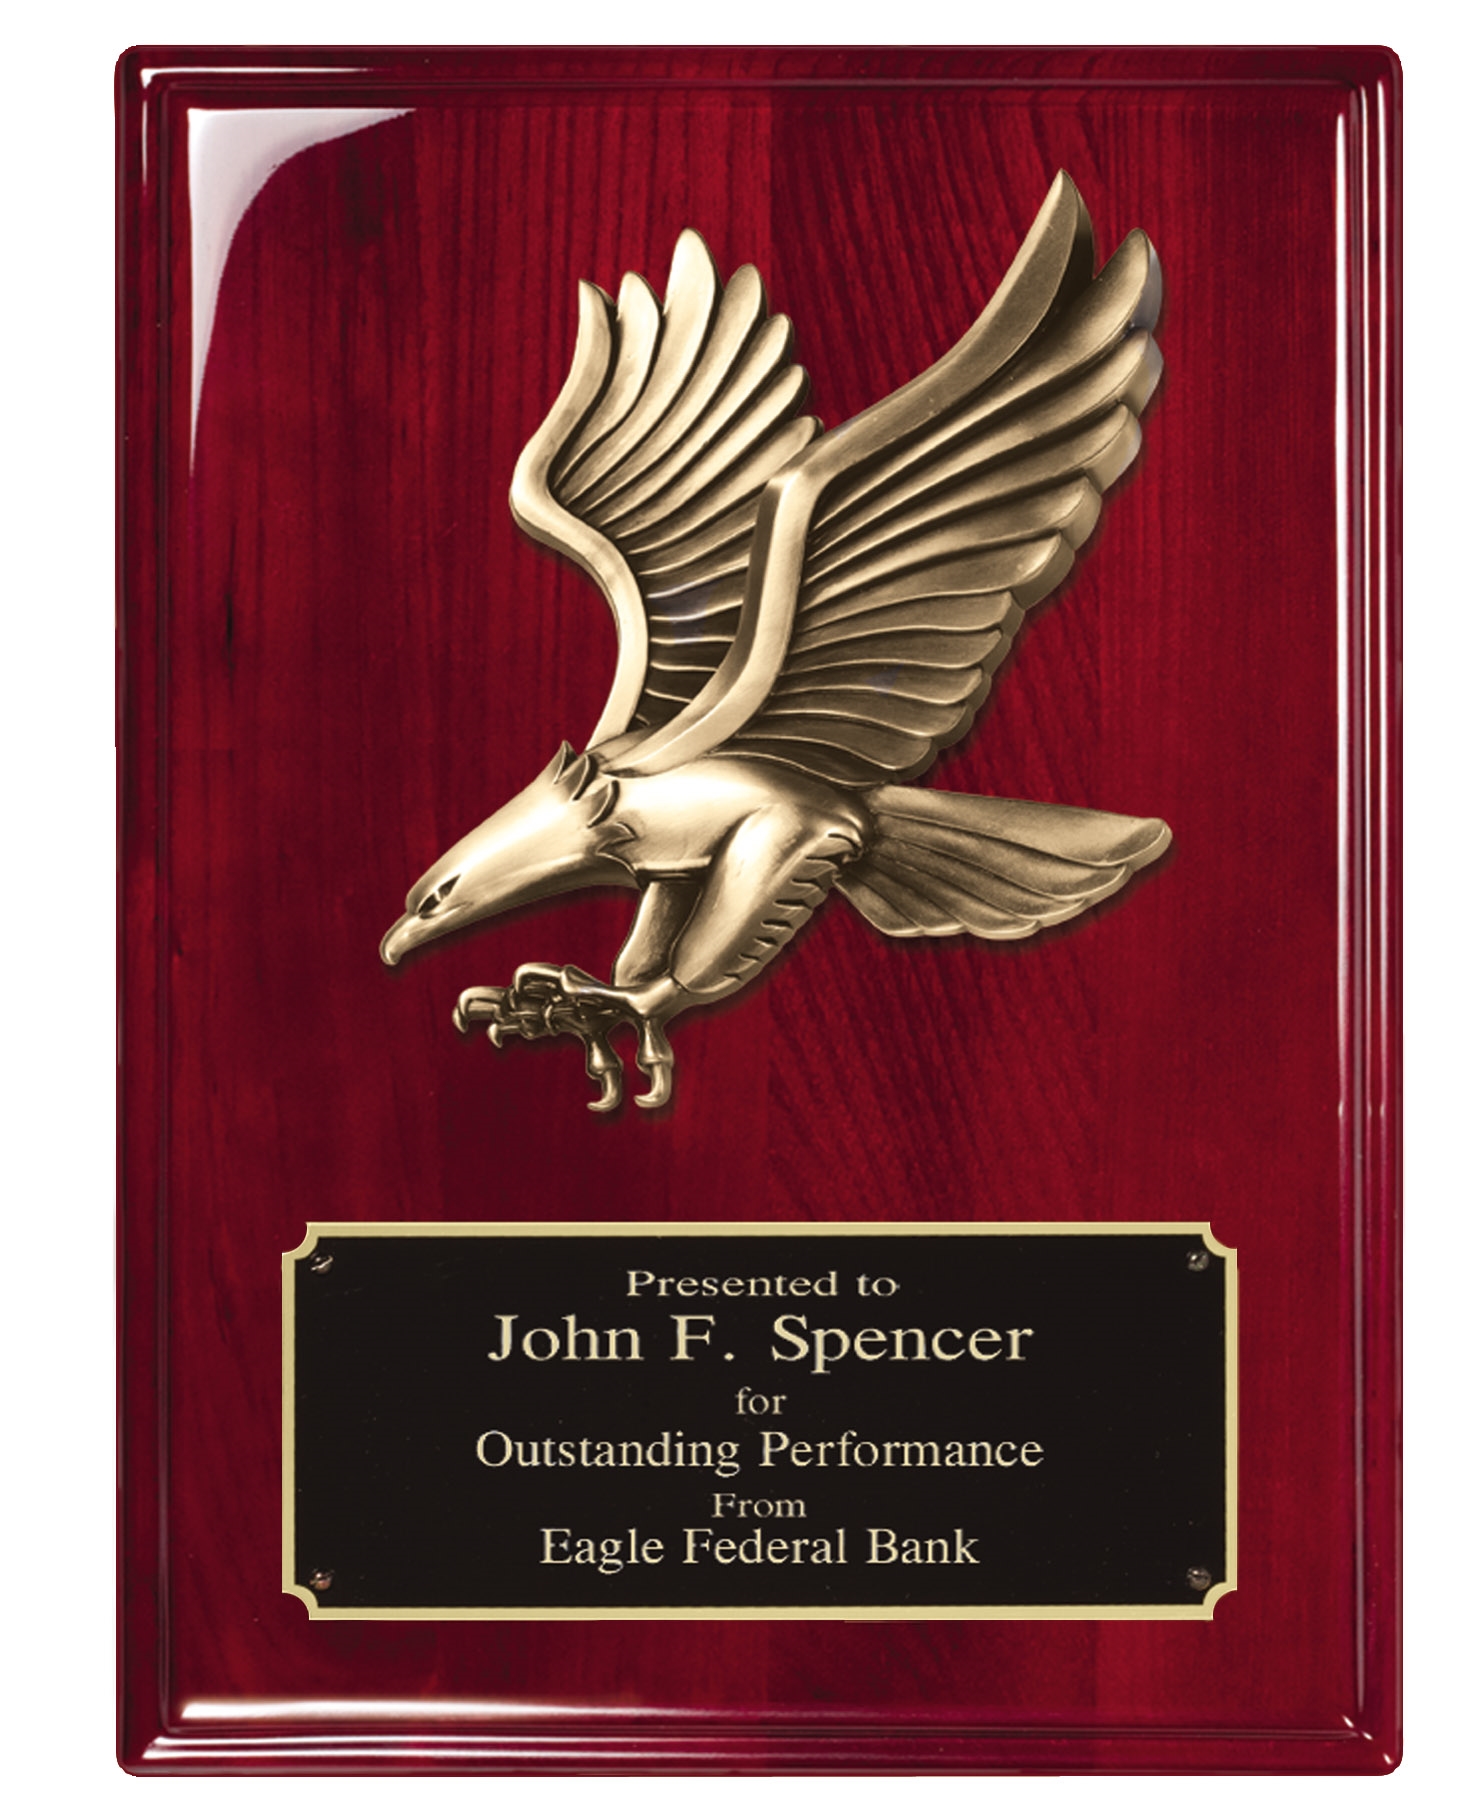 9 x 12 Rosewood Piano Finish Plaque with Eagle